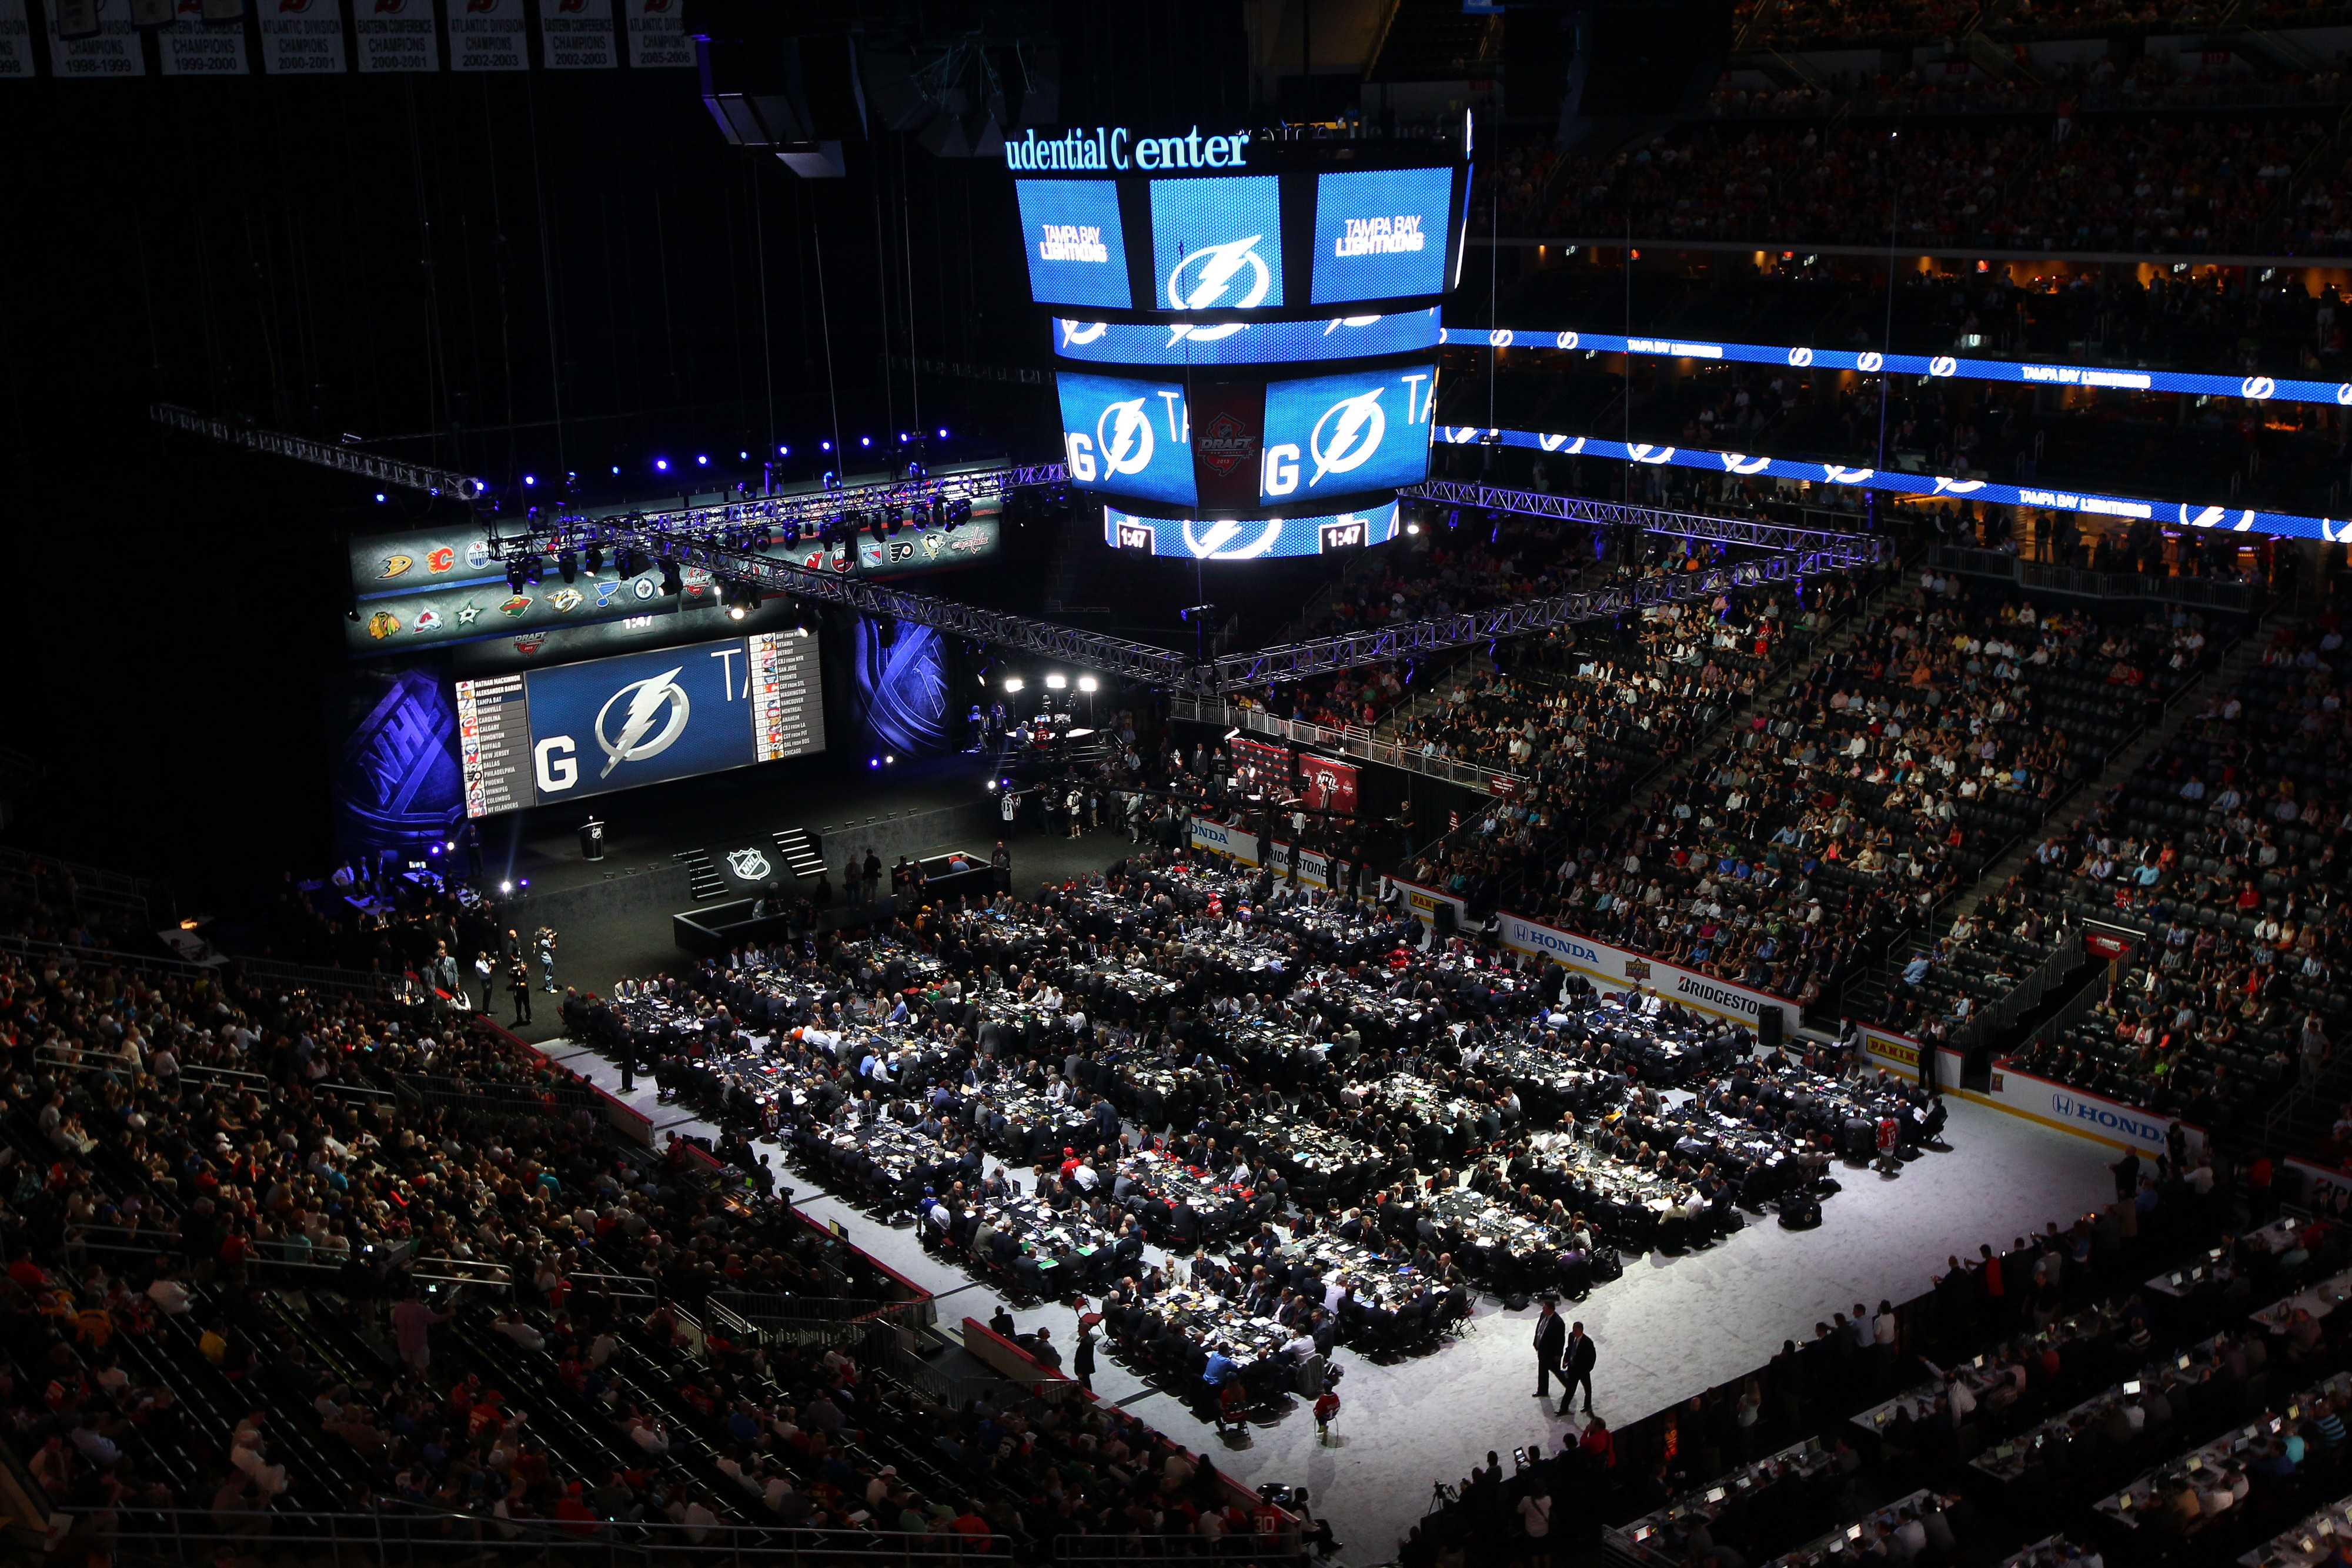 The scene inside the 2013 NHL Draft at the Prudential Center in Newark, NJ.